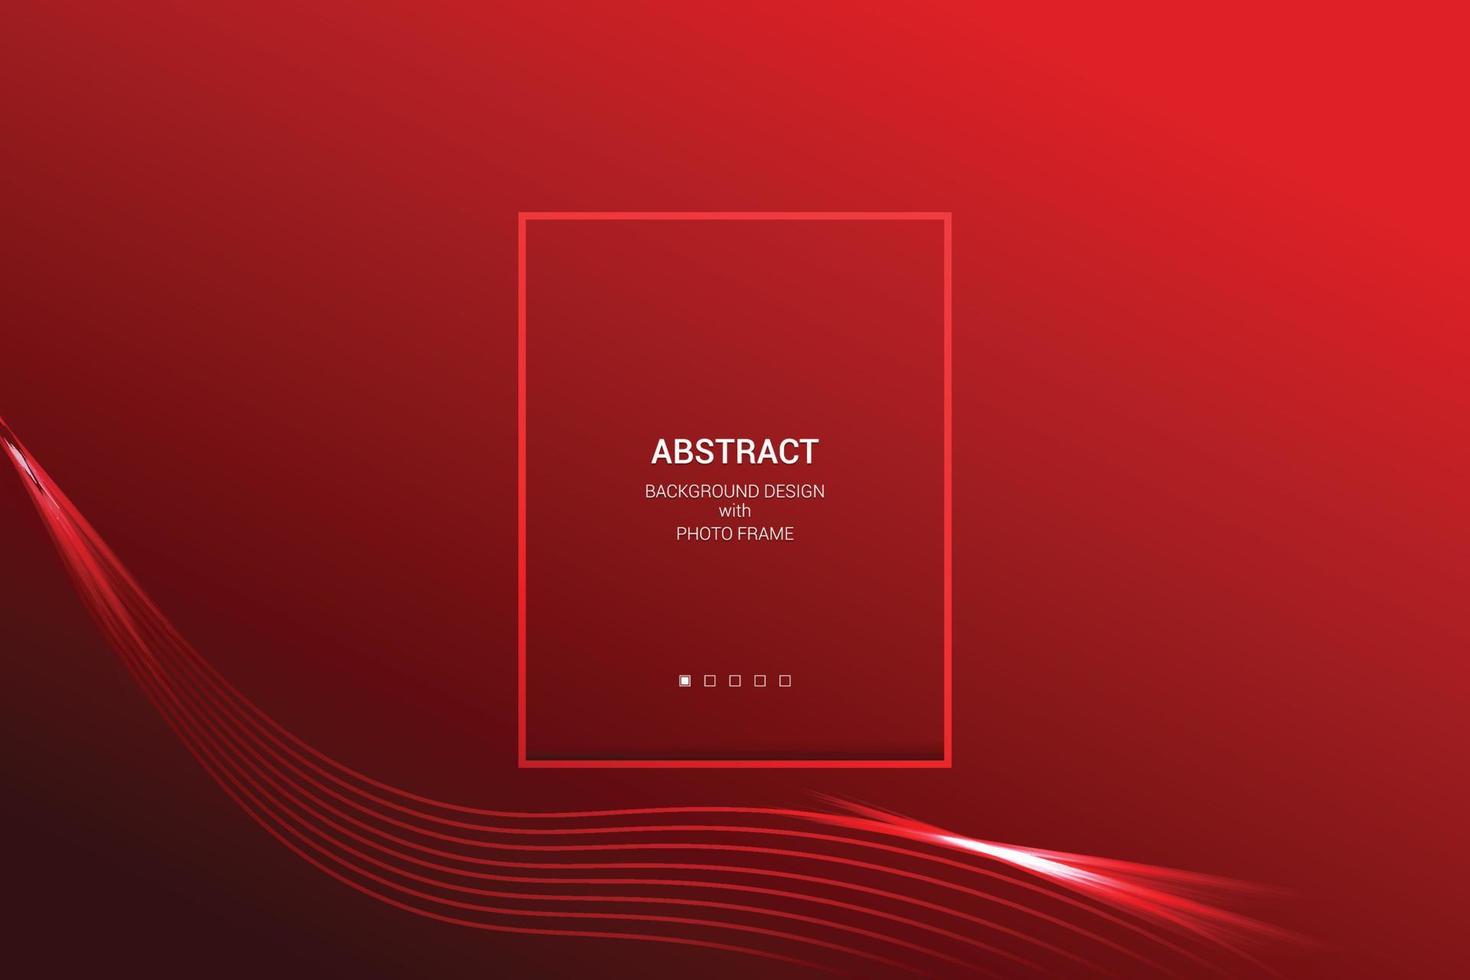 Soft Red colorful gradient Abstract vector template design with photo frame.